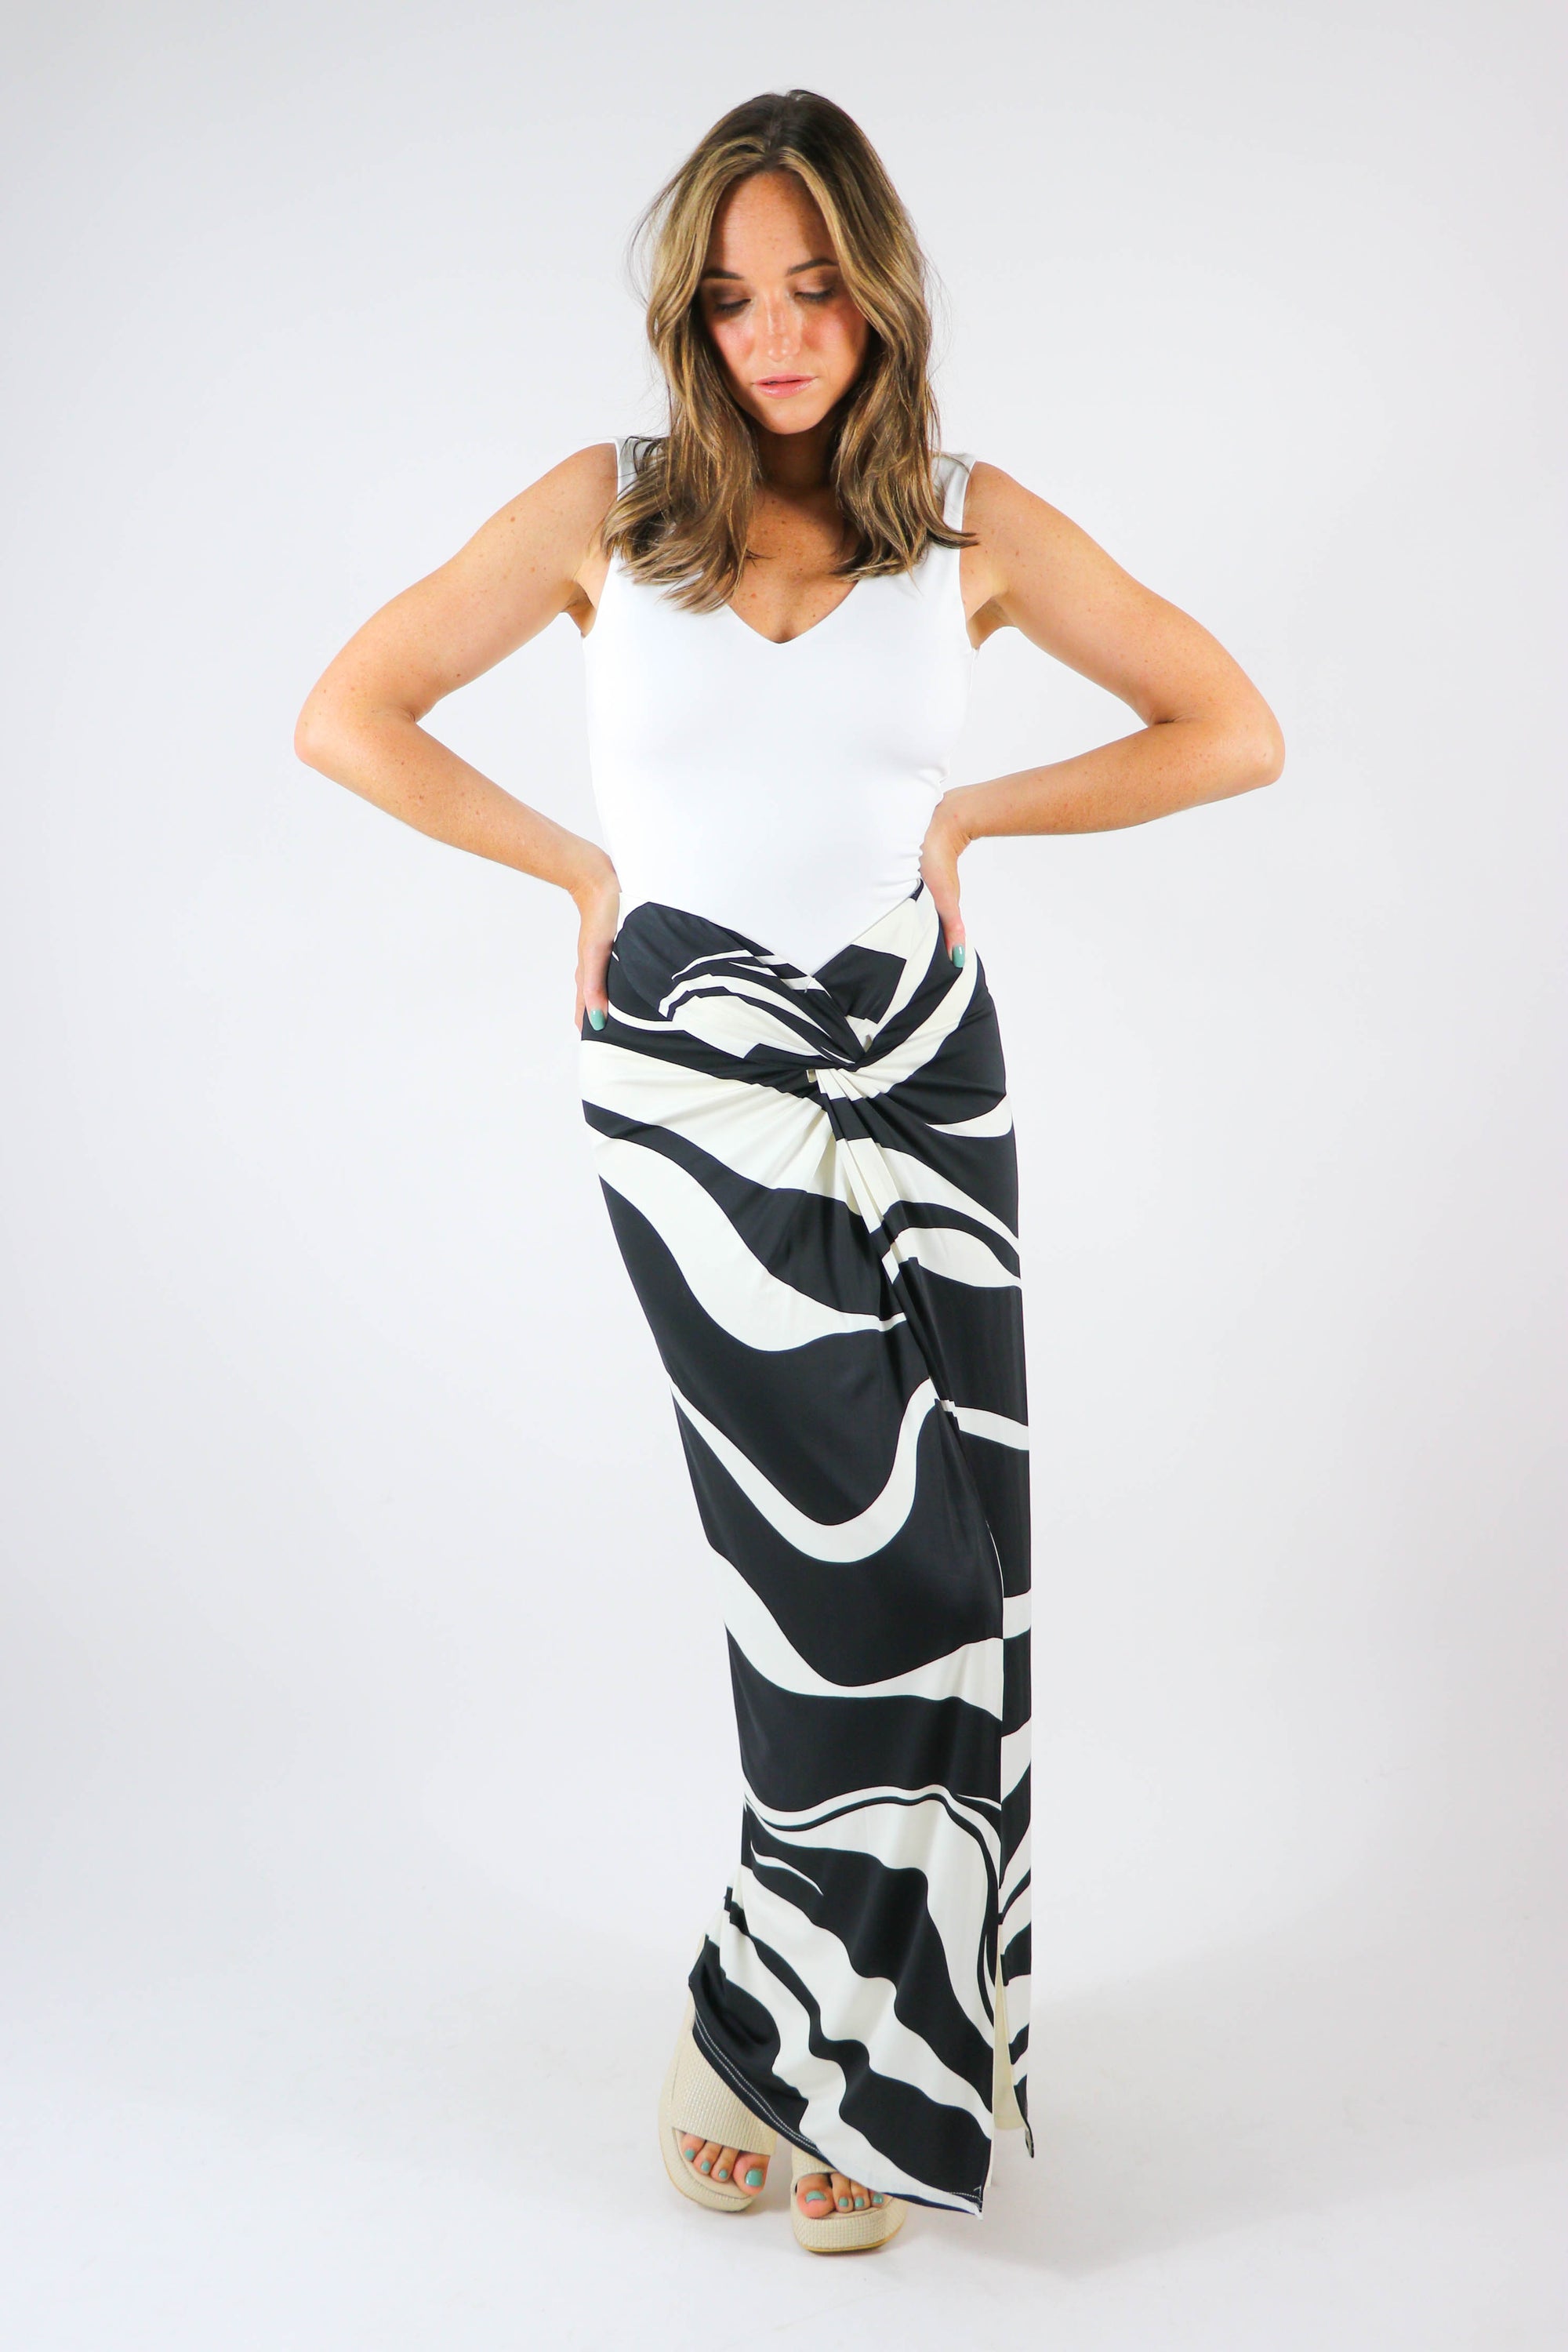 Black & White Maxi Skirt for Summer | Sweetest Stitch Online Boutique